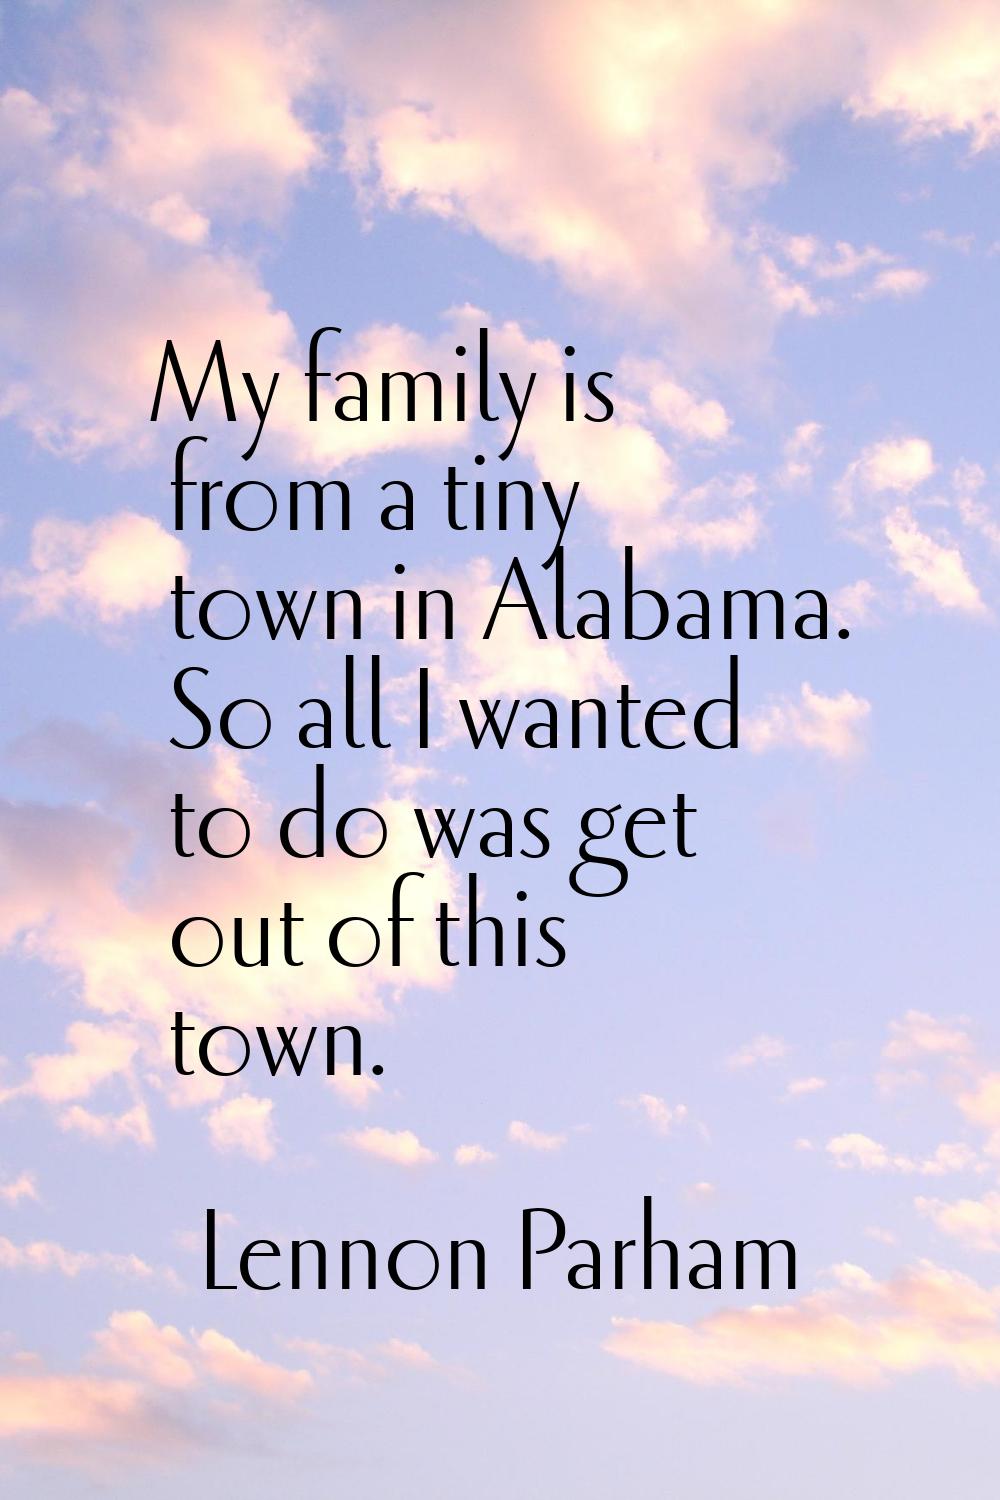 My family is from a tiny town in Alabama. So all I wanted to do was get out of this town.